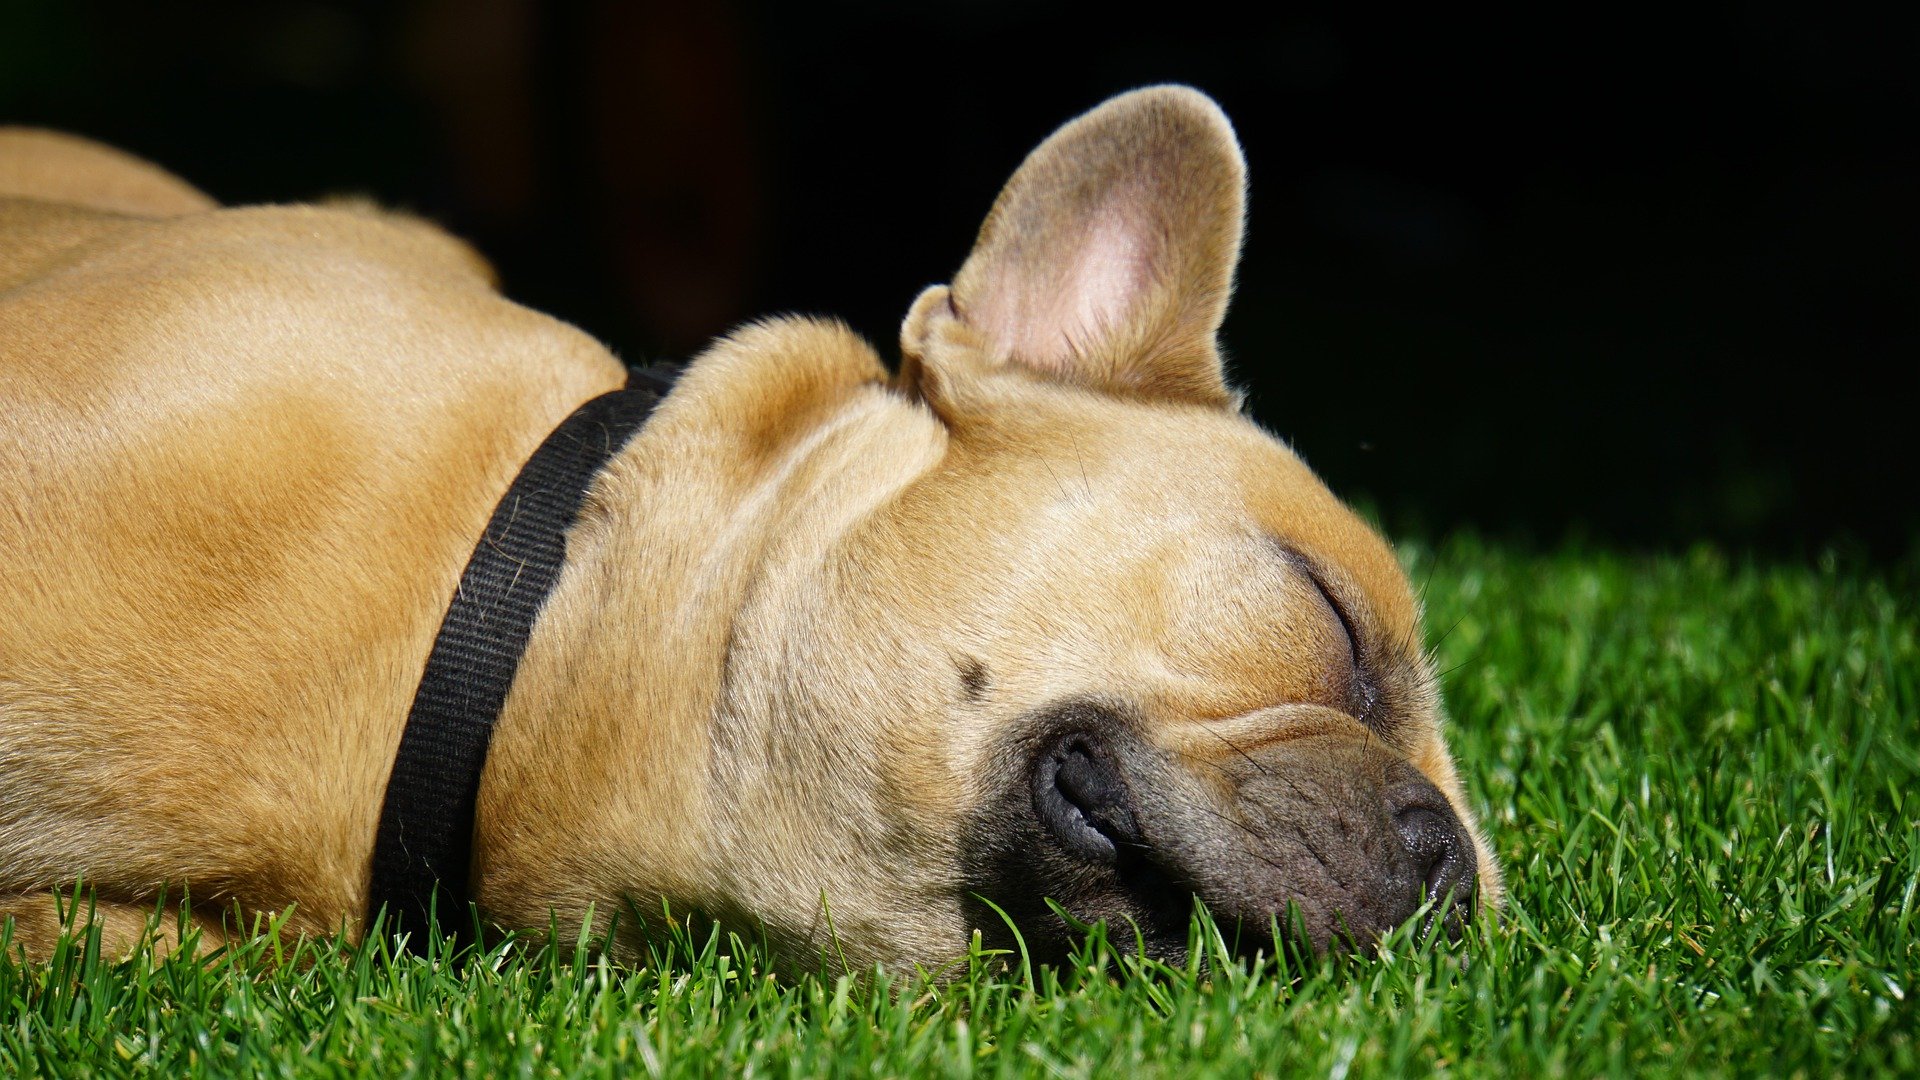 16 Fun Facts About French Bulldogs